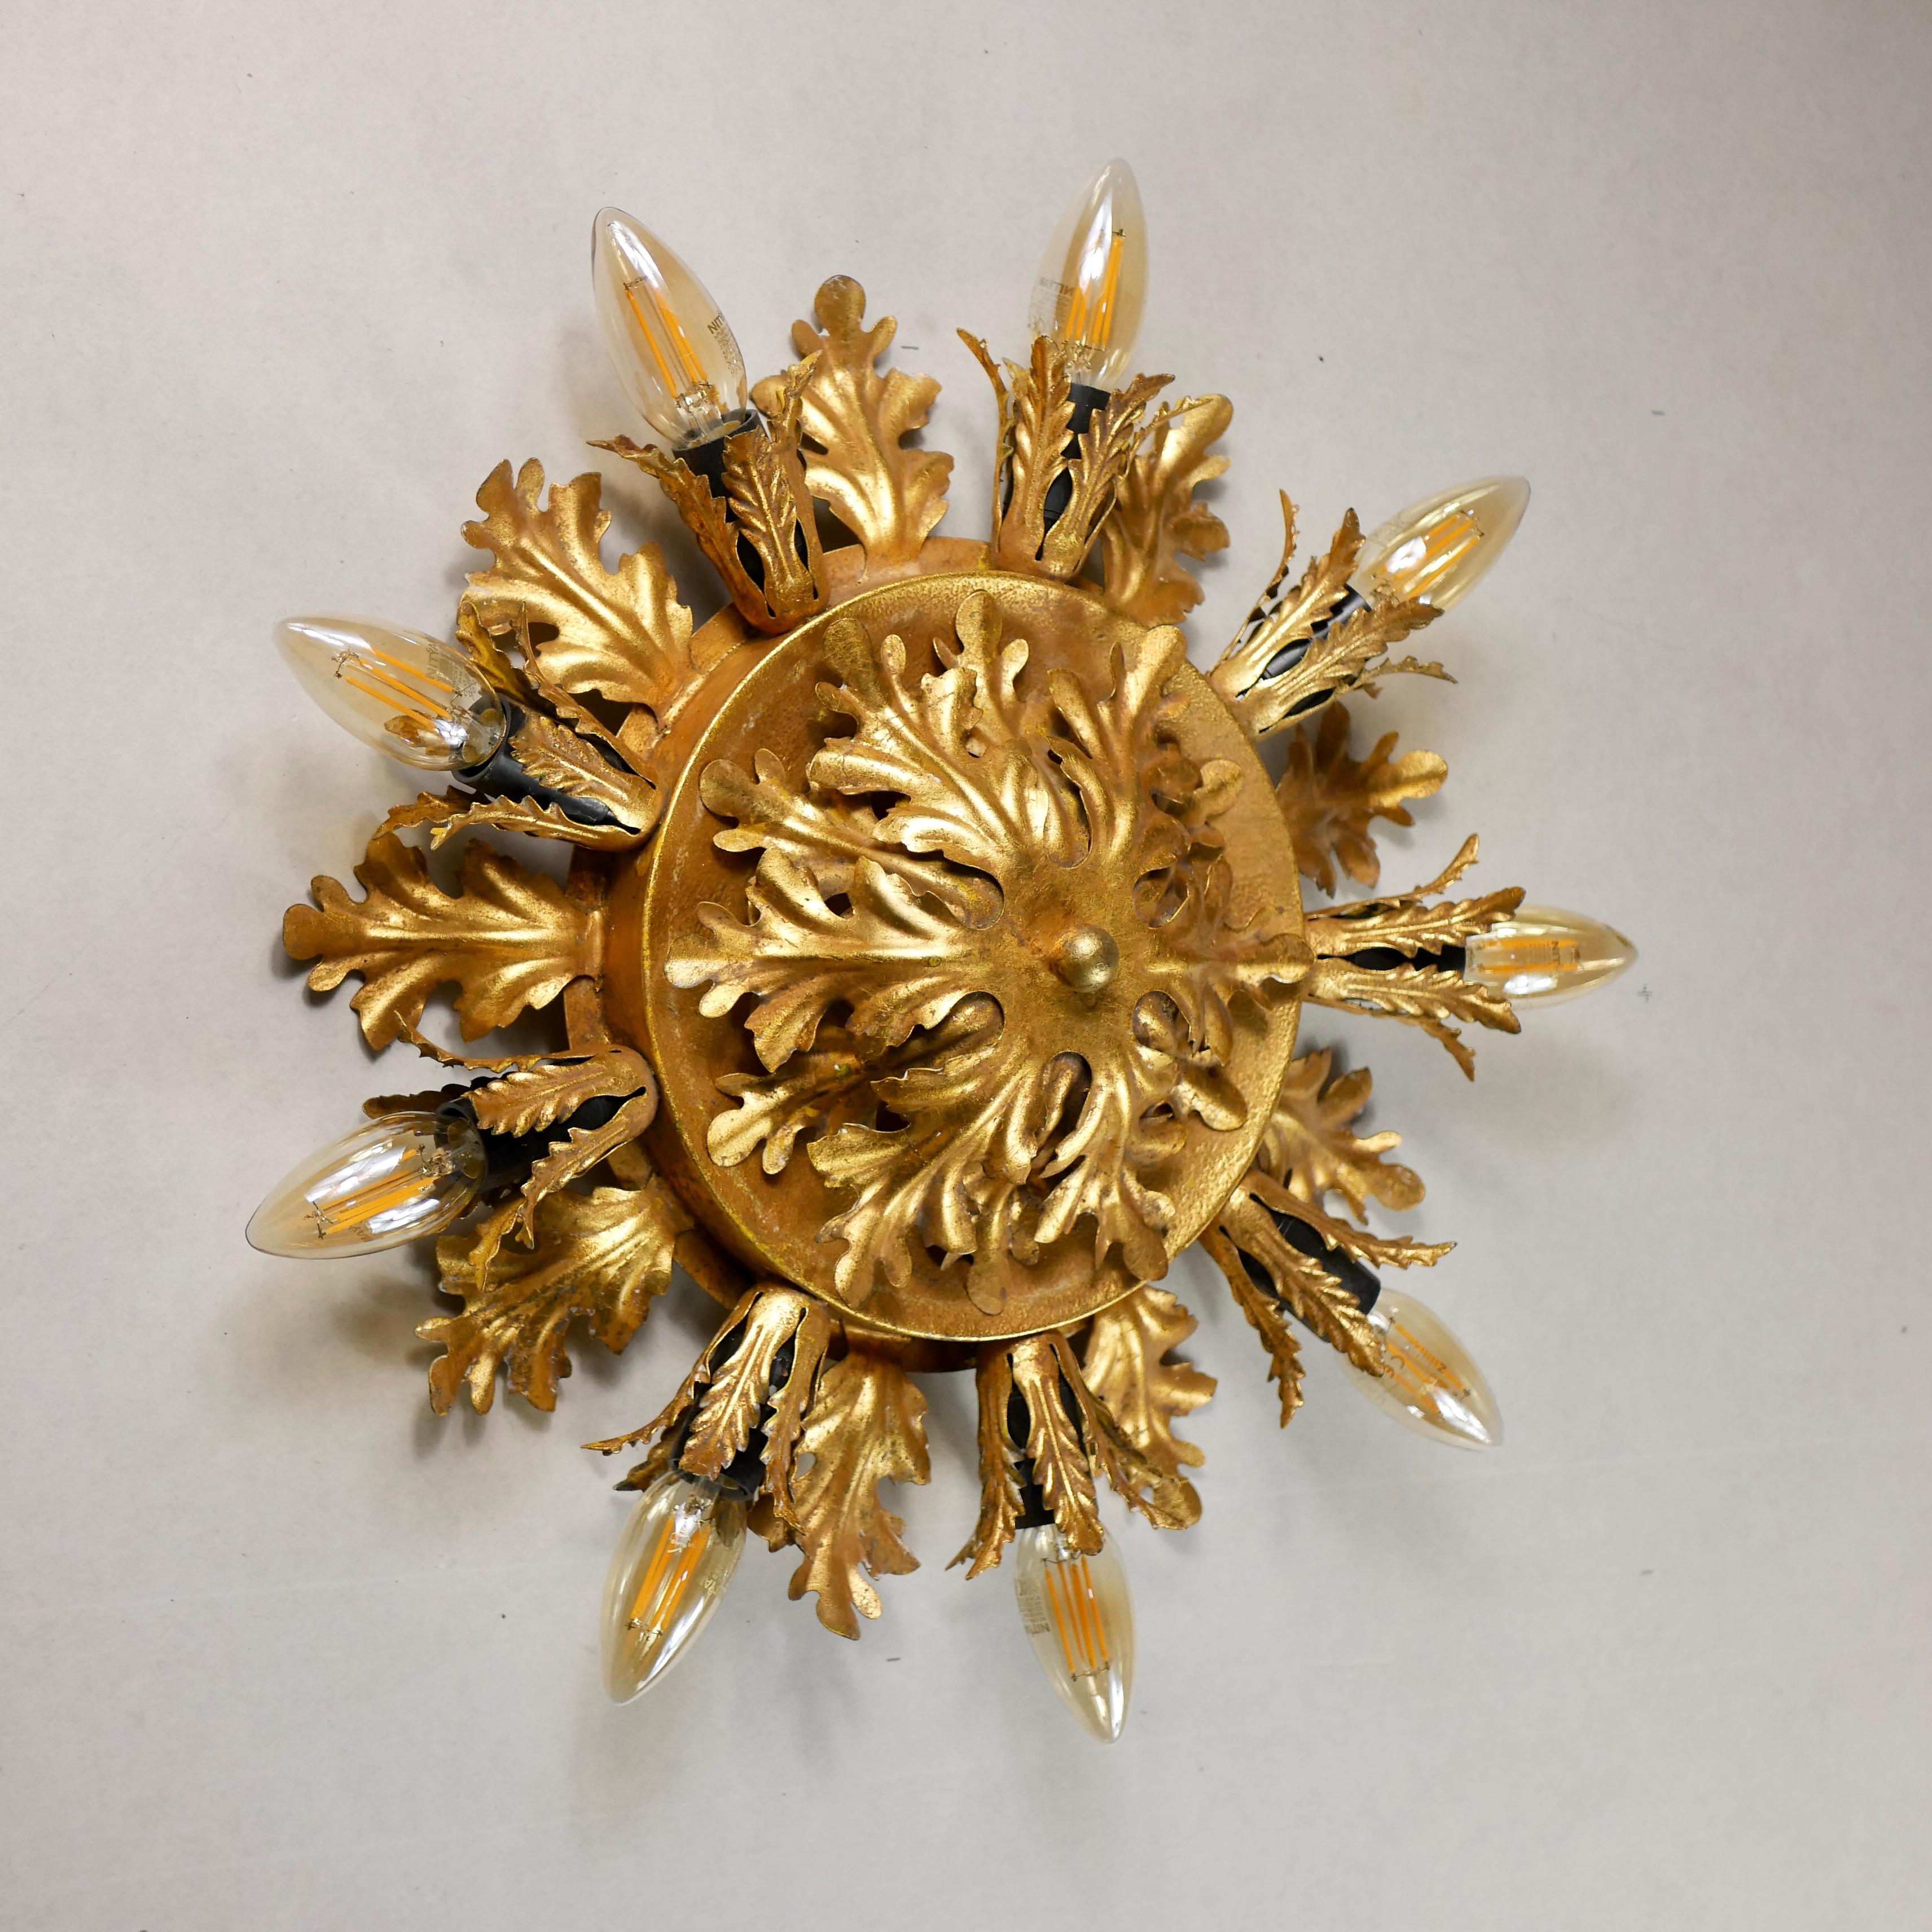 Spectacular ceiling light or wall light by Banci Firenze, made in Italy in the 1980s.
Sunburst shape, with gilded acanthus leaves.
Brought directly from Florence.
Dimensions : diameter 40cm (or 48cm with the bulbs), depth 11cm.